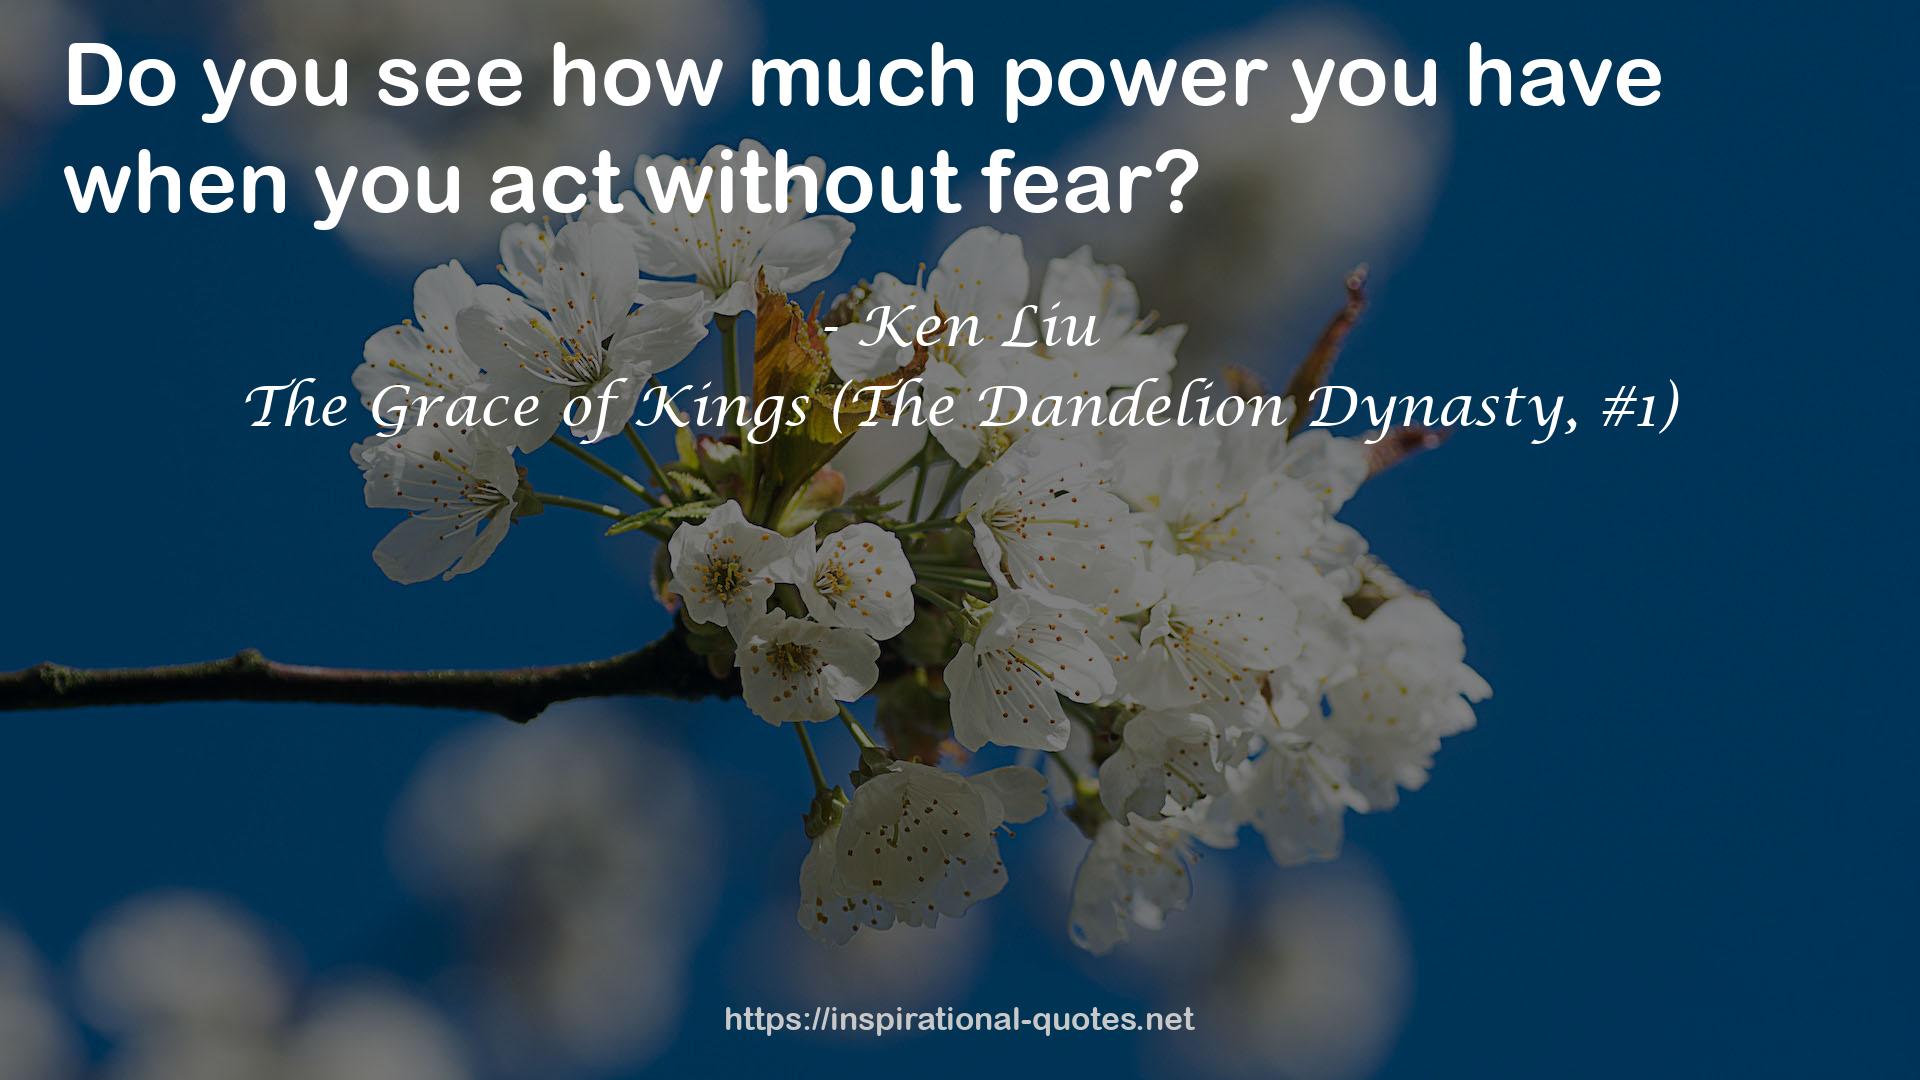 The Grace of Kings (The Dandelion Dynasty, #1) QUOTES